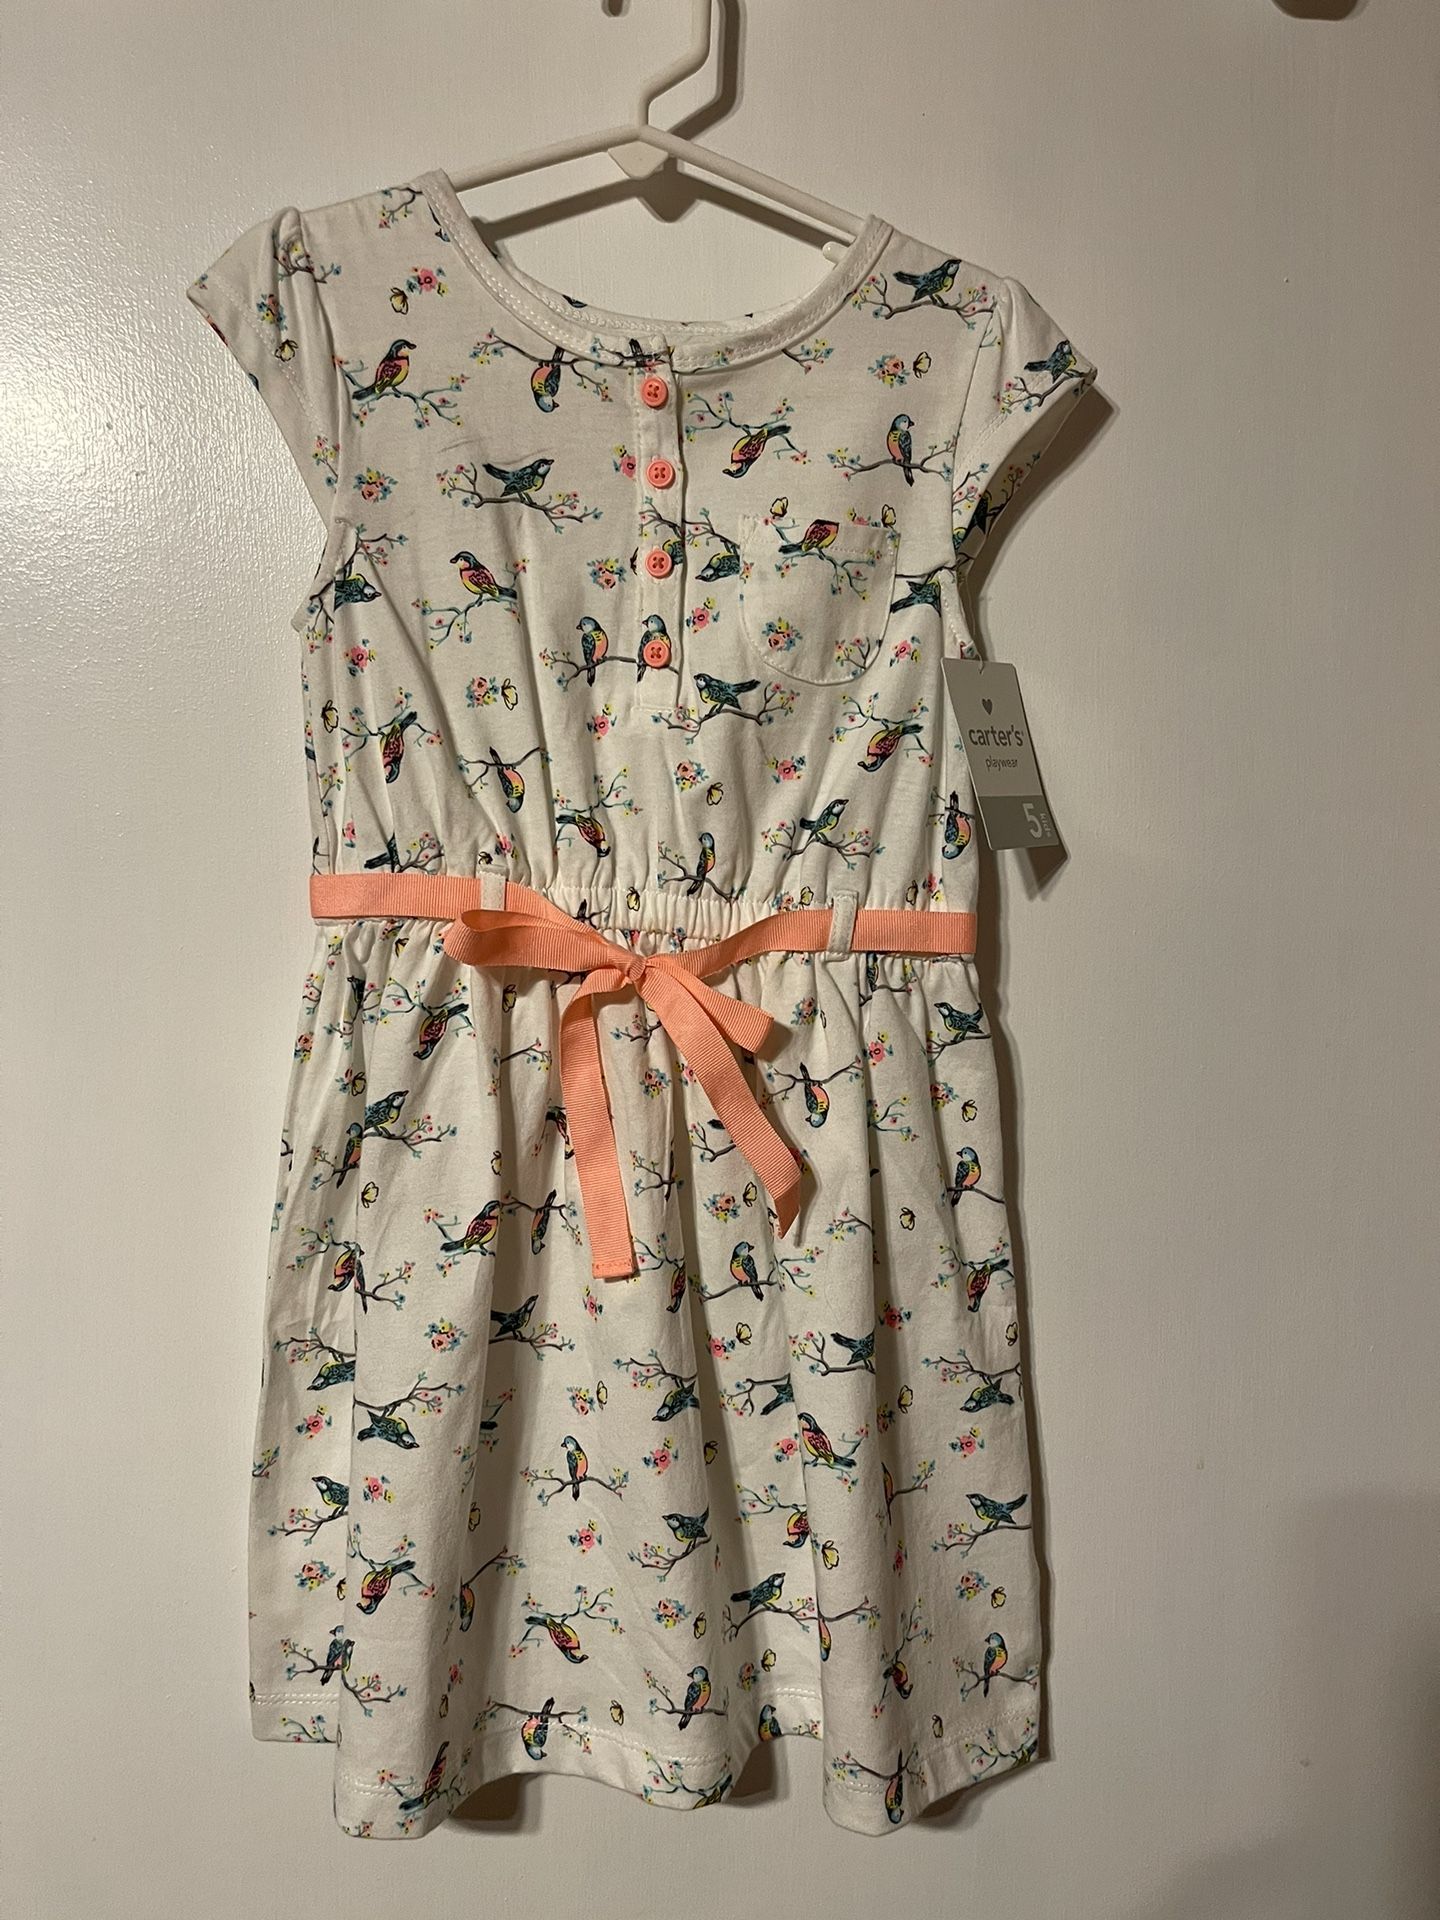 Girls Size 5 Carter’s Dress White with Birds & Flowers